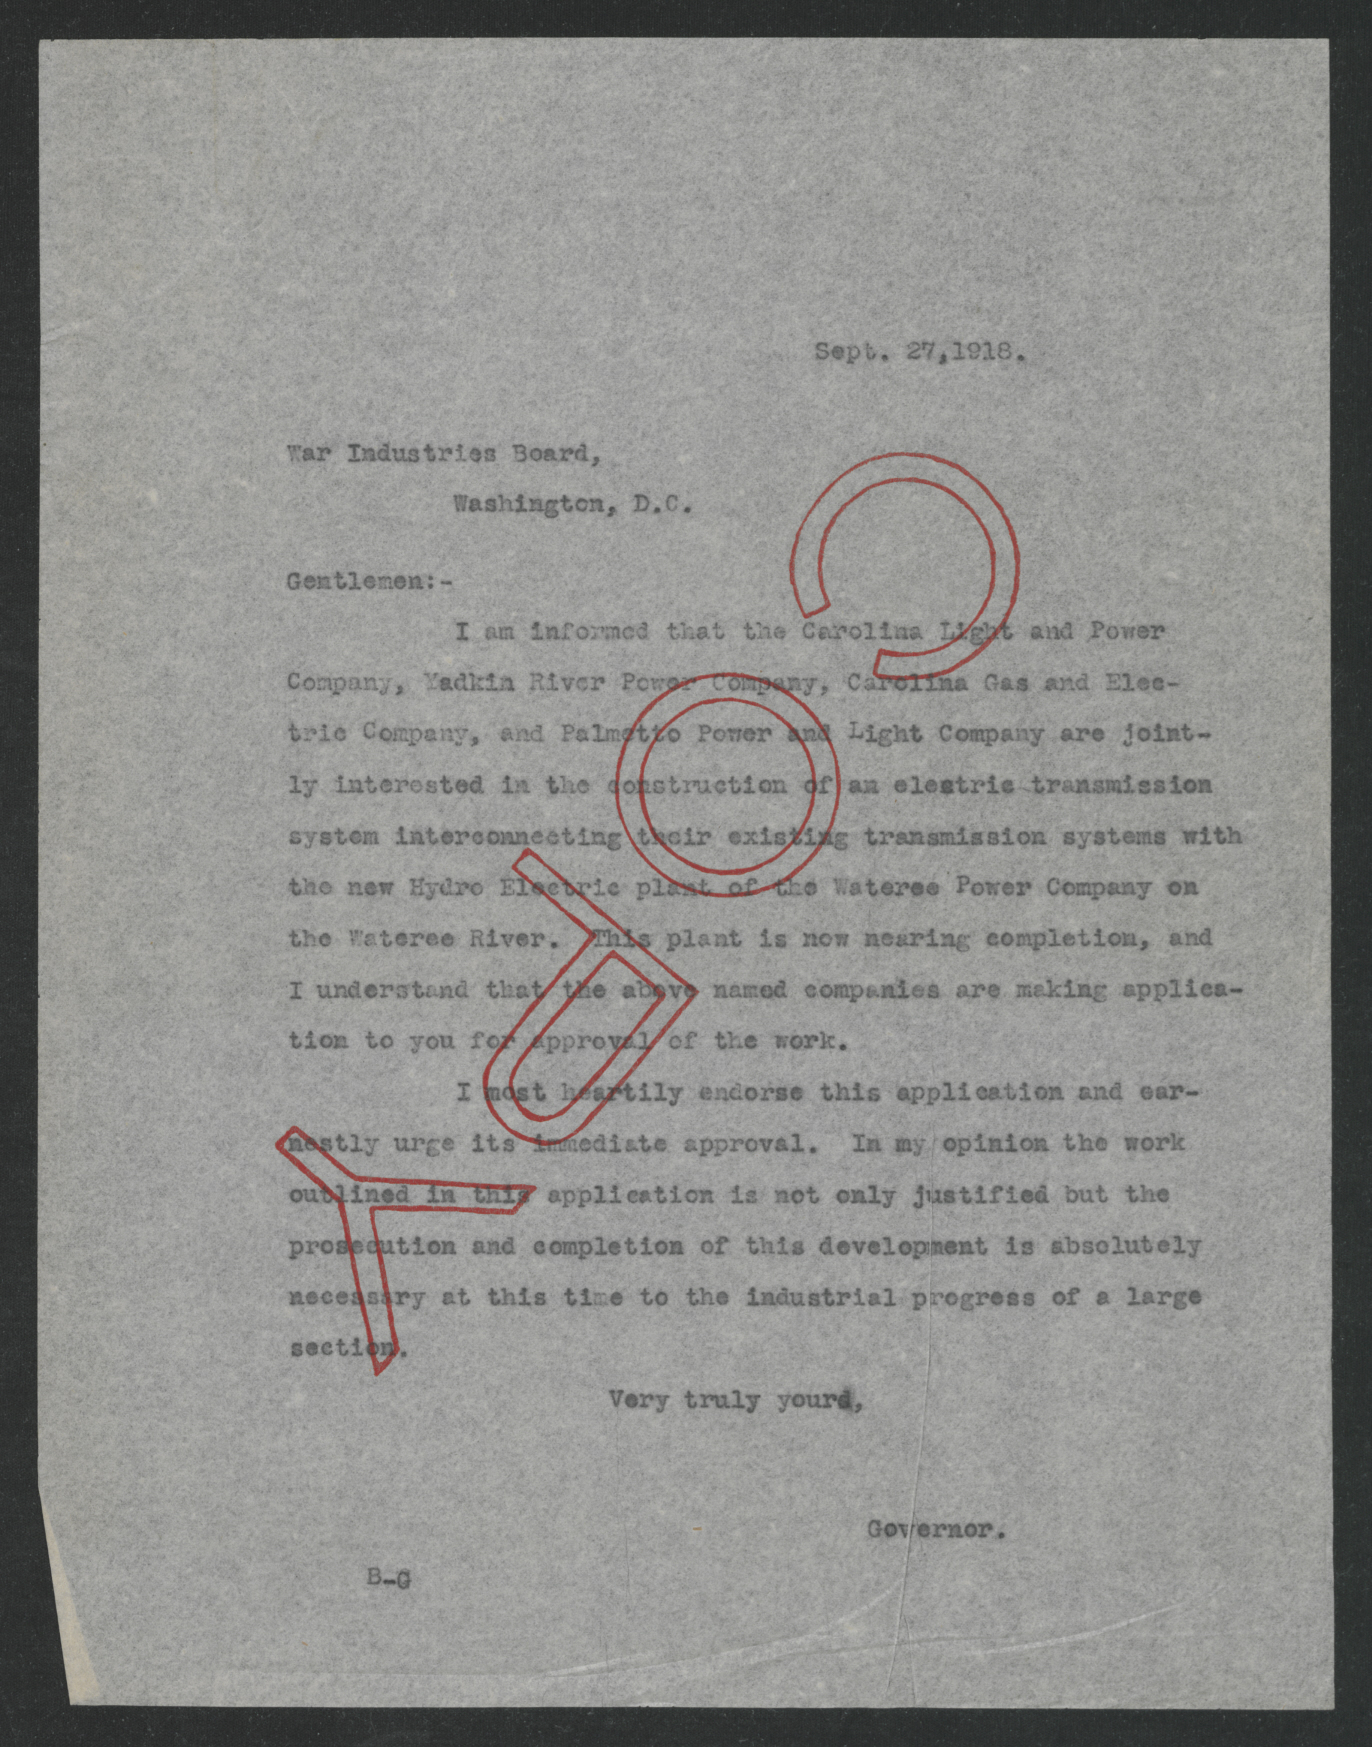 Letter from Thomas W. Bickett to the War Industries Board, September 27, 1918